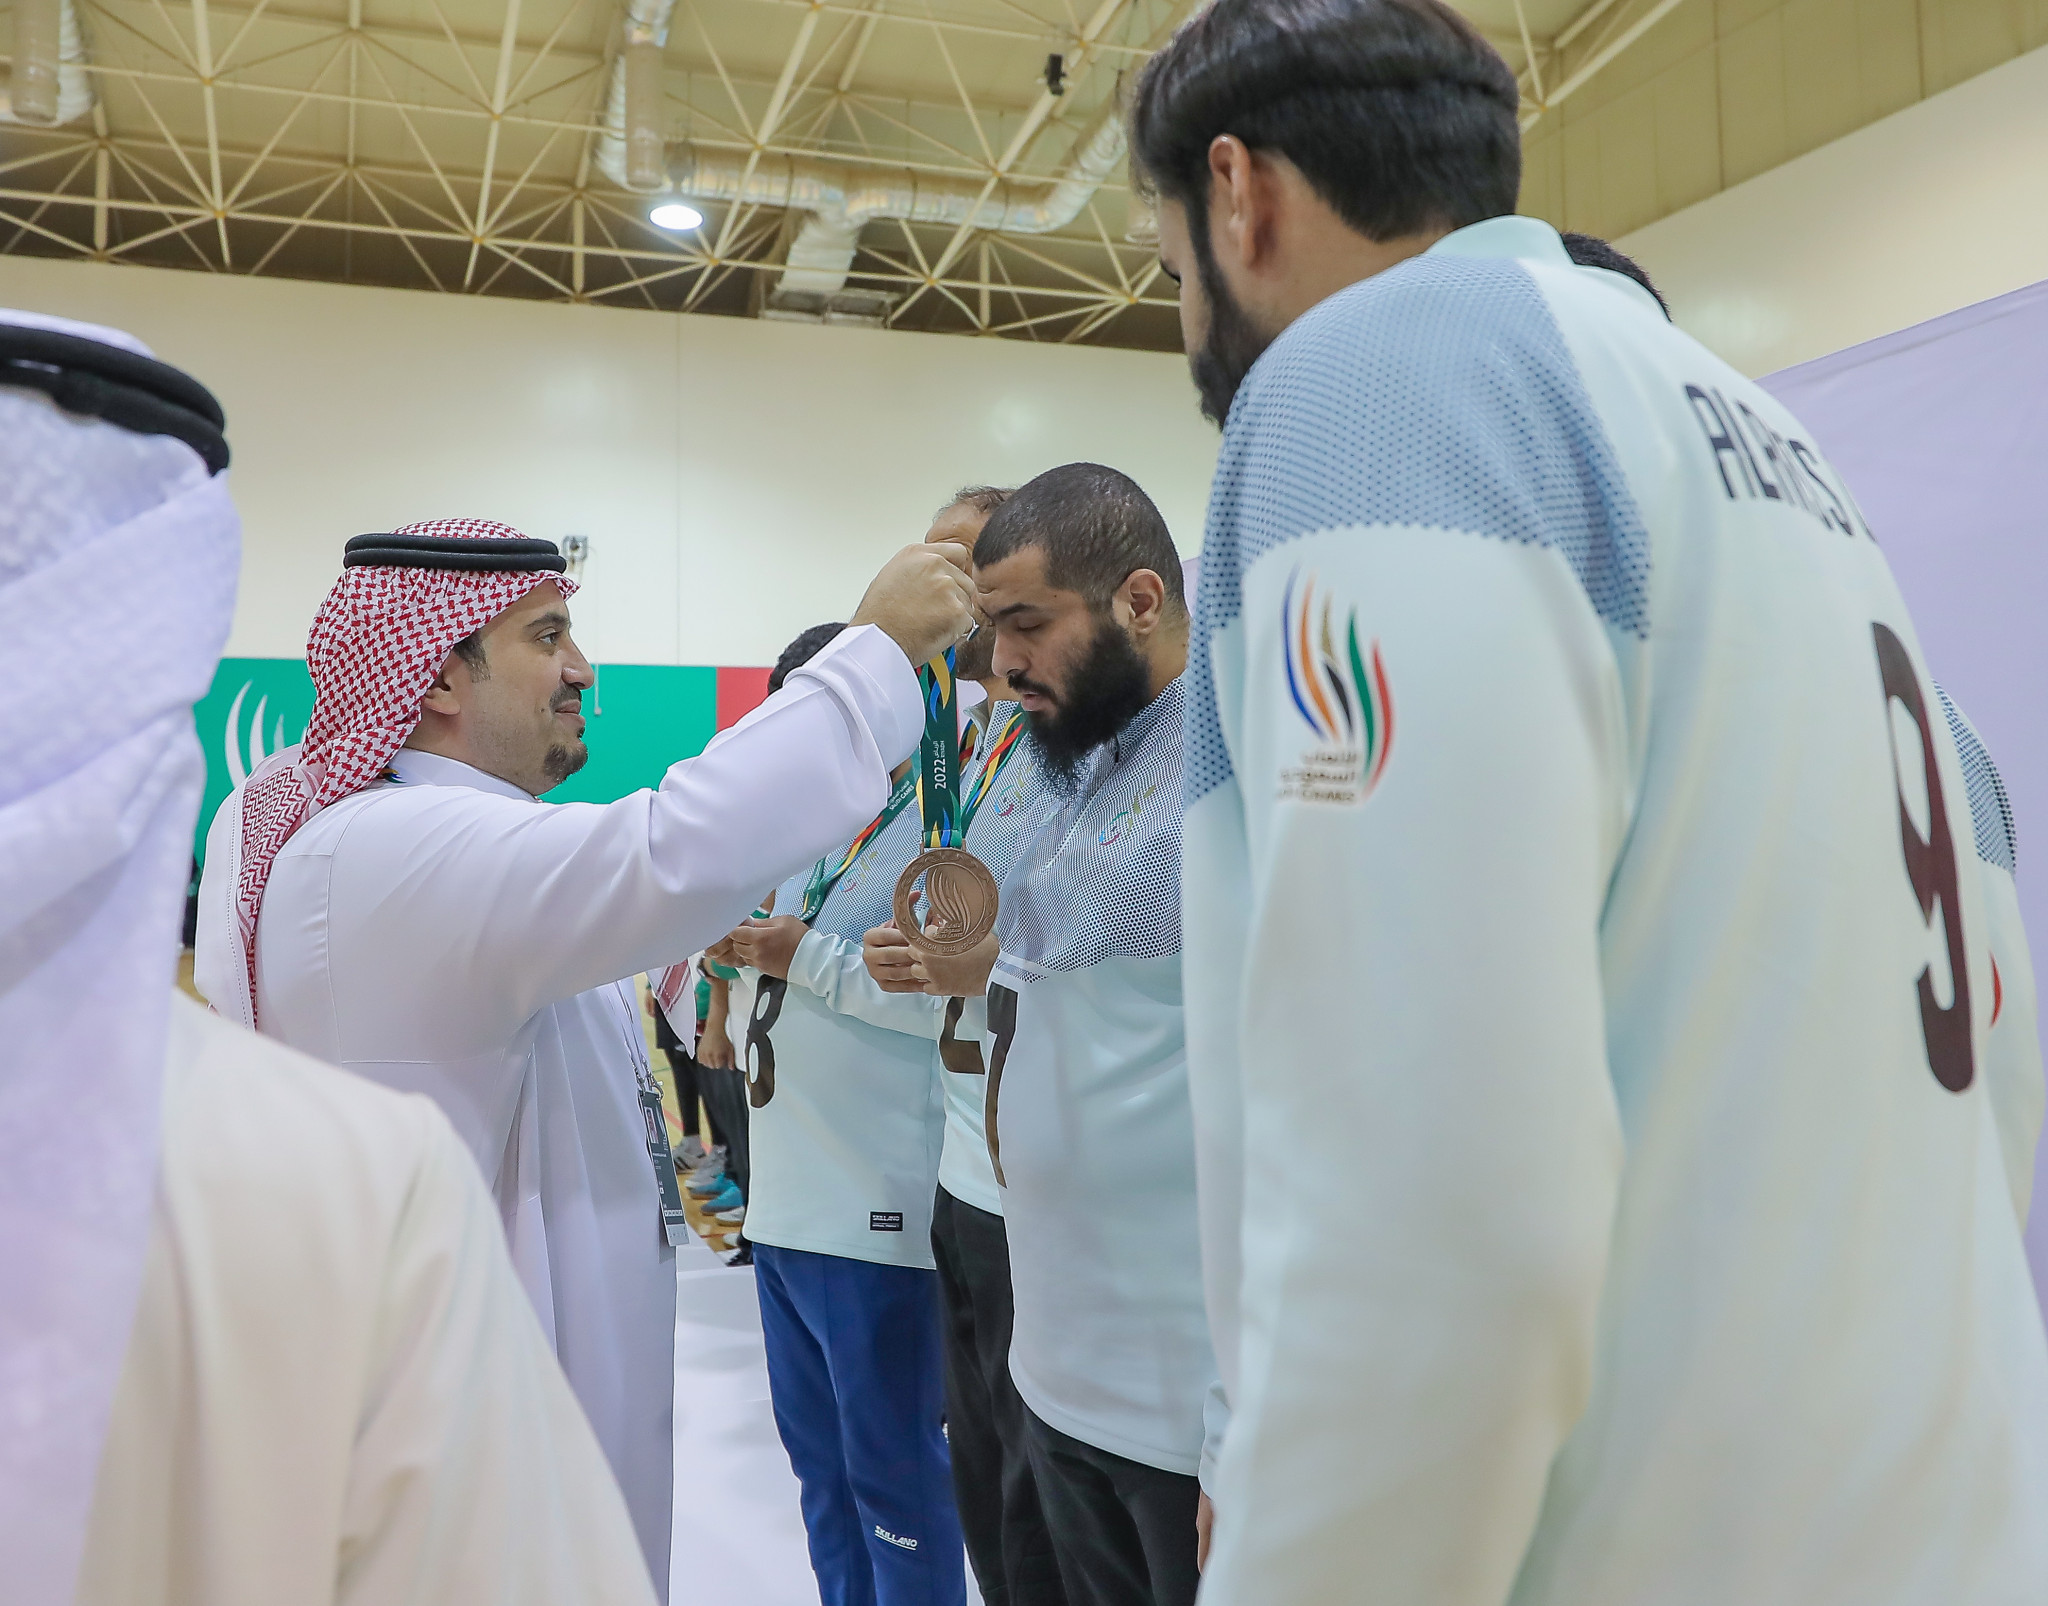 Prince Fahd bin Jalawi bin Abdulaziz bin Musaed, the vice-president of the Saudi Olympic and Paralympic Committee, presented the medals for goalball ©Saudi Games